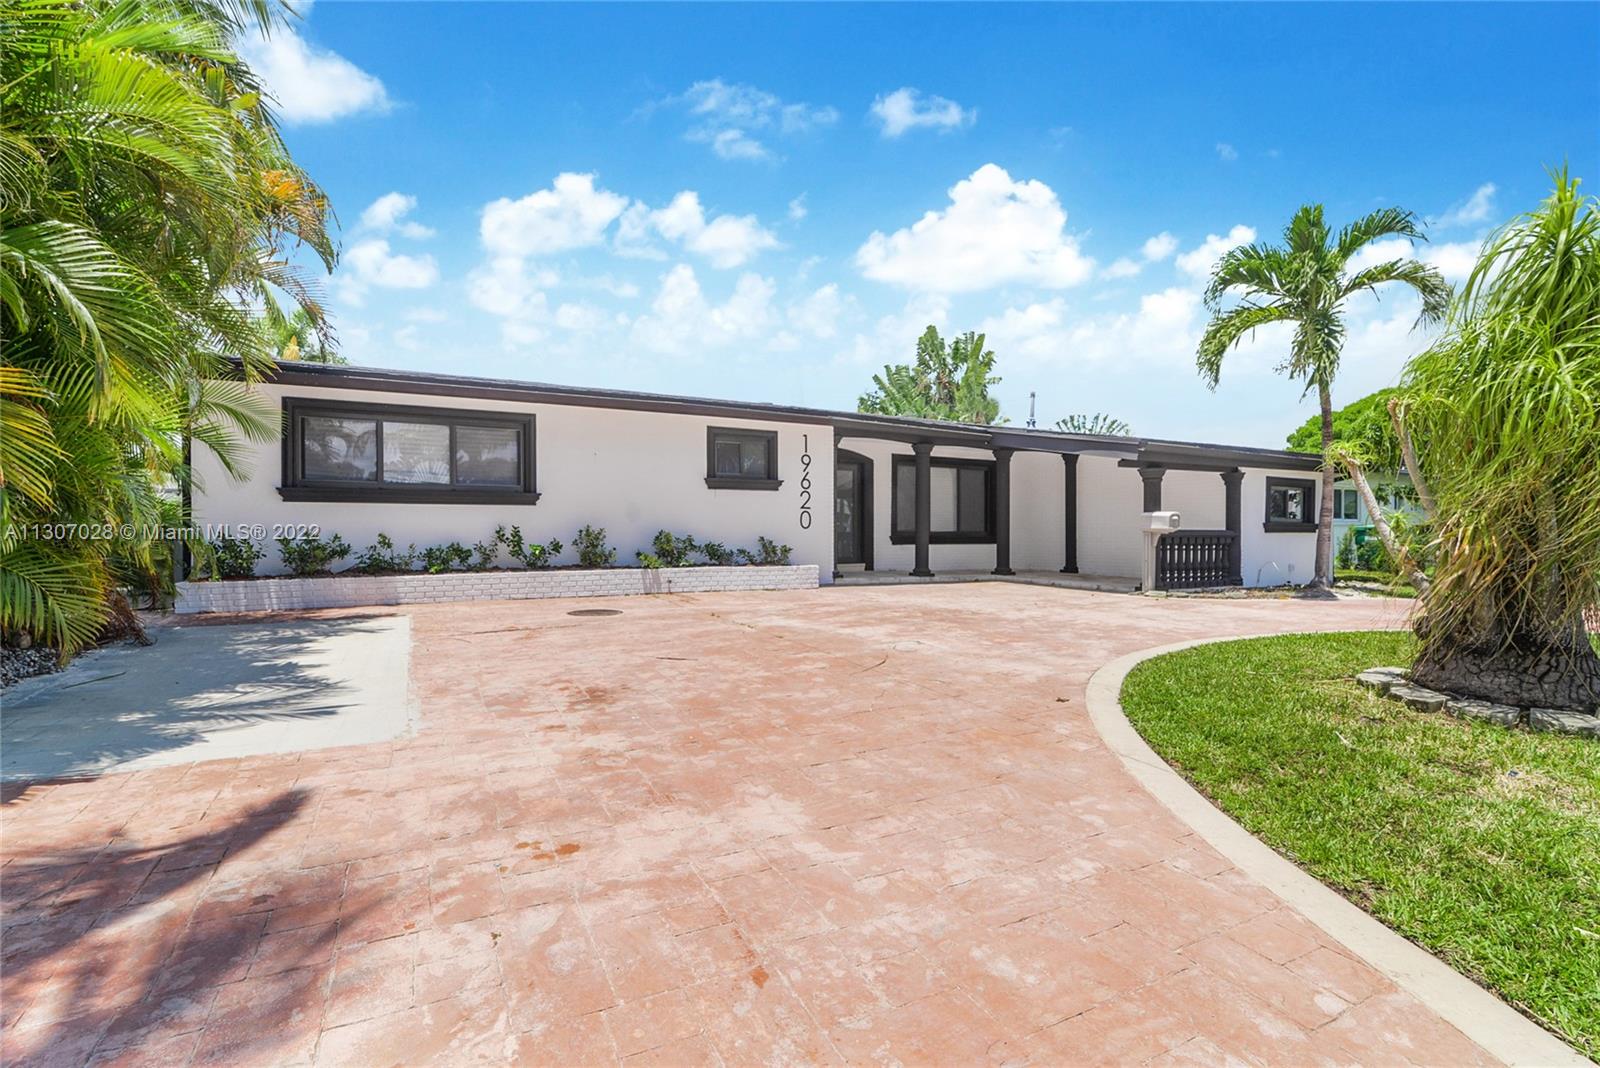 Photo 18 of 19620 19th Ave in Miami - MLS A11307028